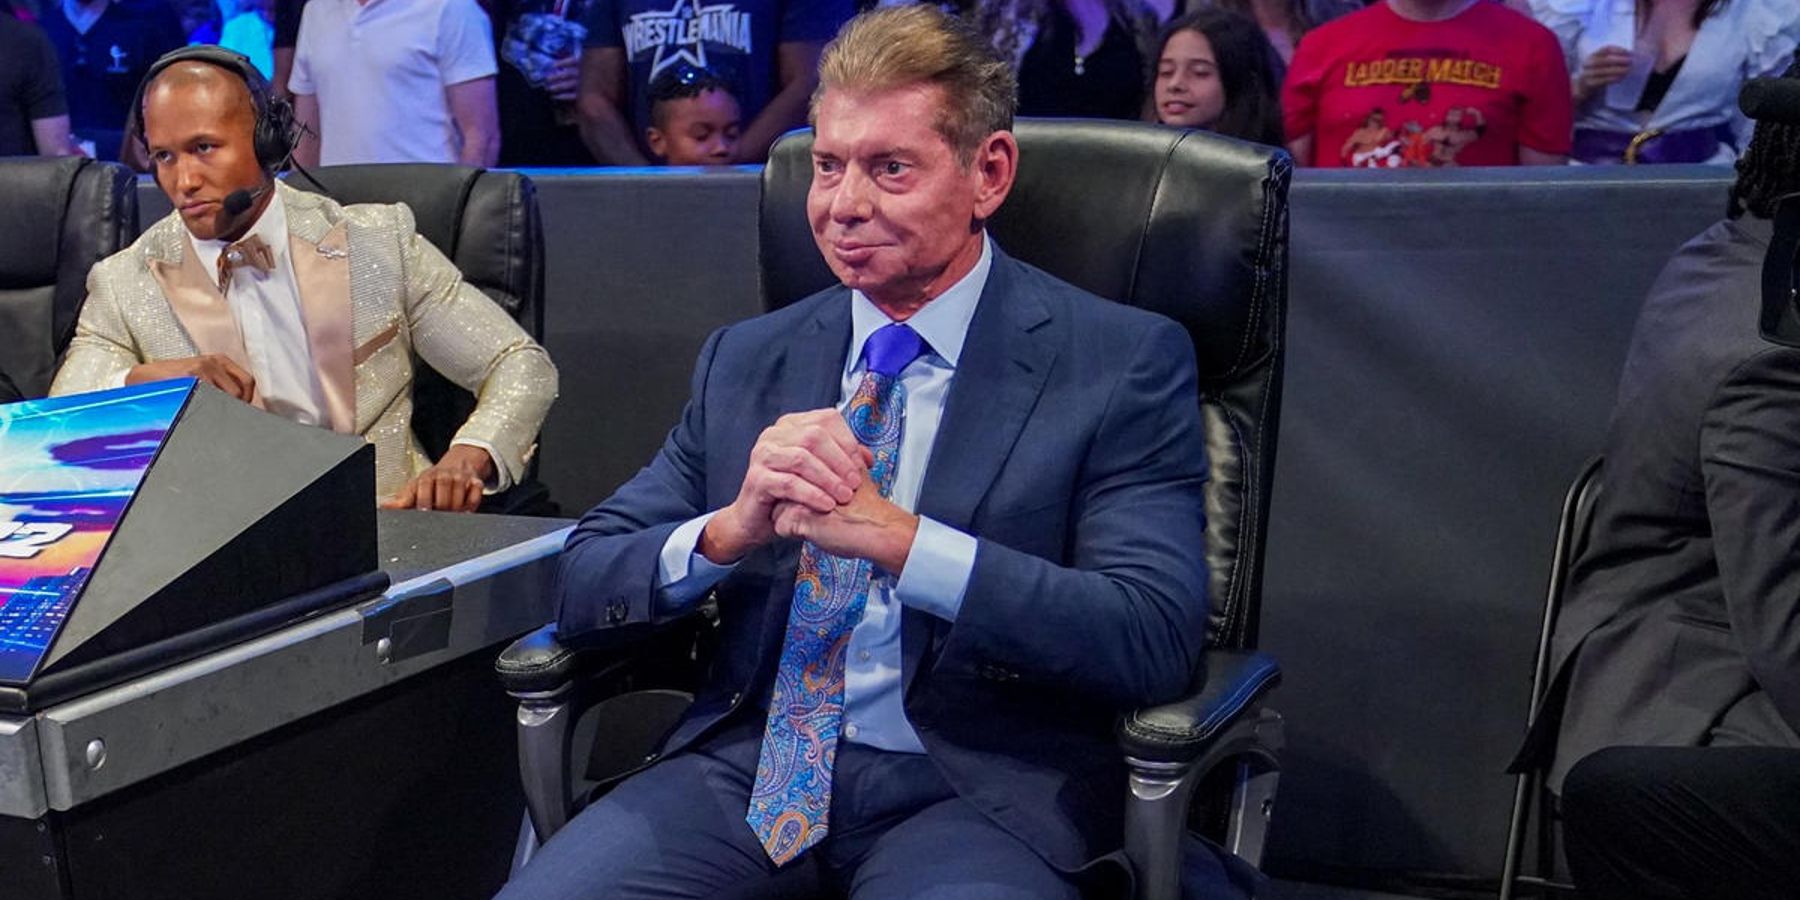 Vince McMahon watches a match between Austin Theory and Pat McAfee at WWE WrestleMania 38.